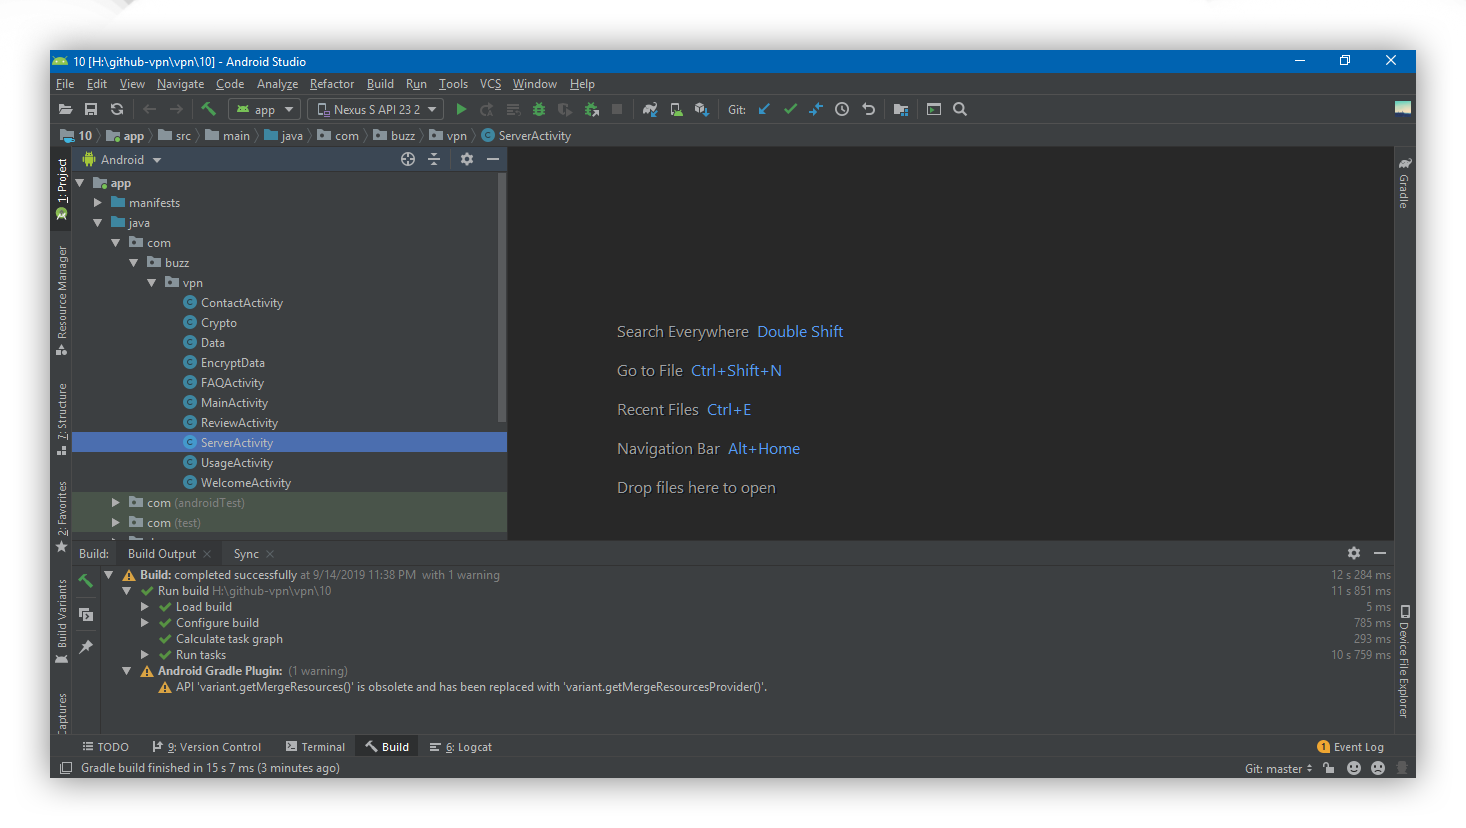 how to update android studio project from github